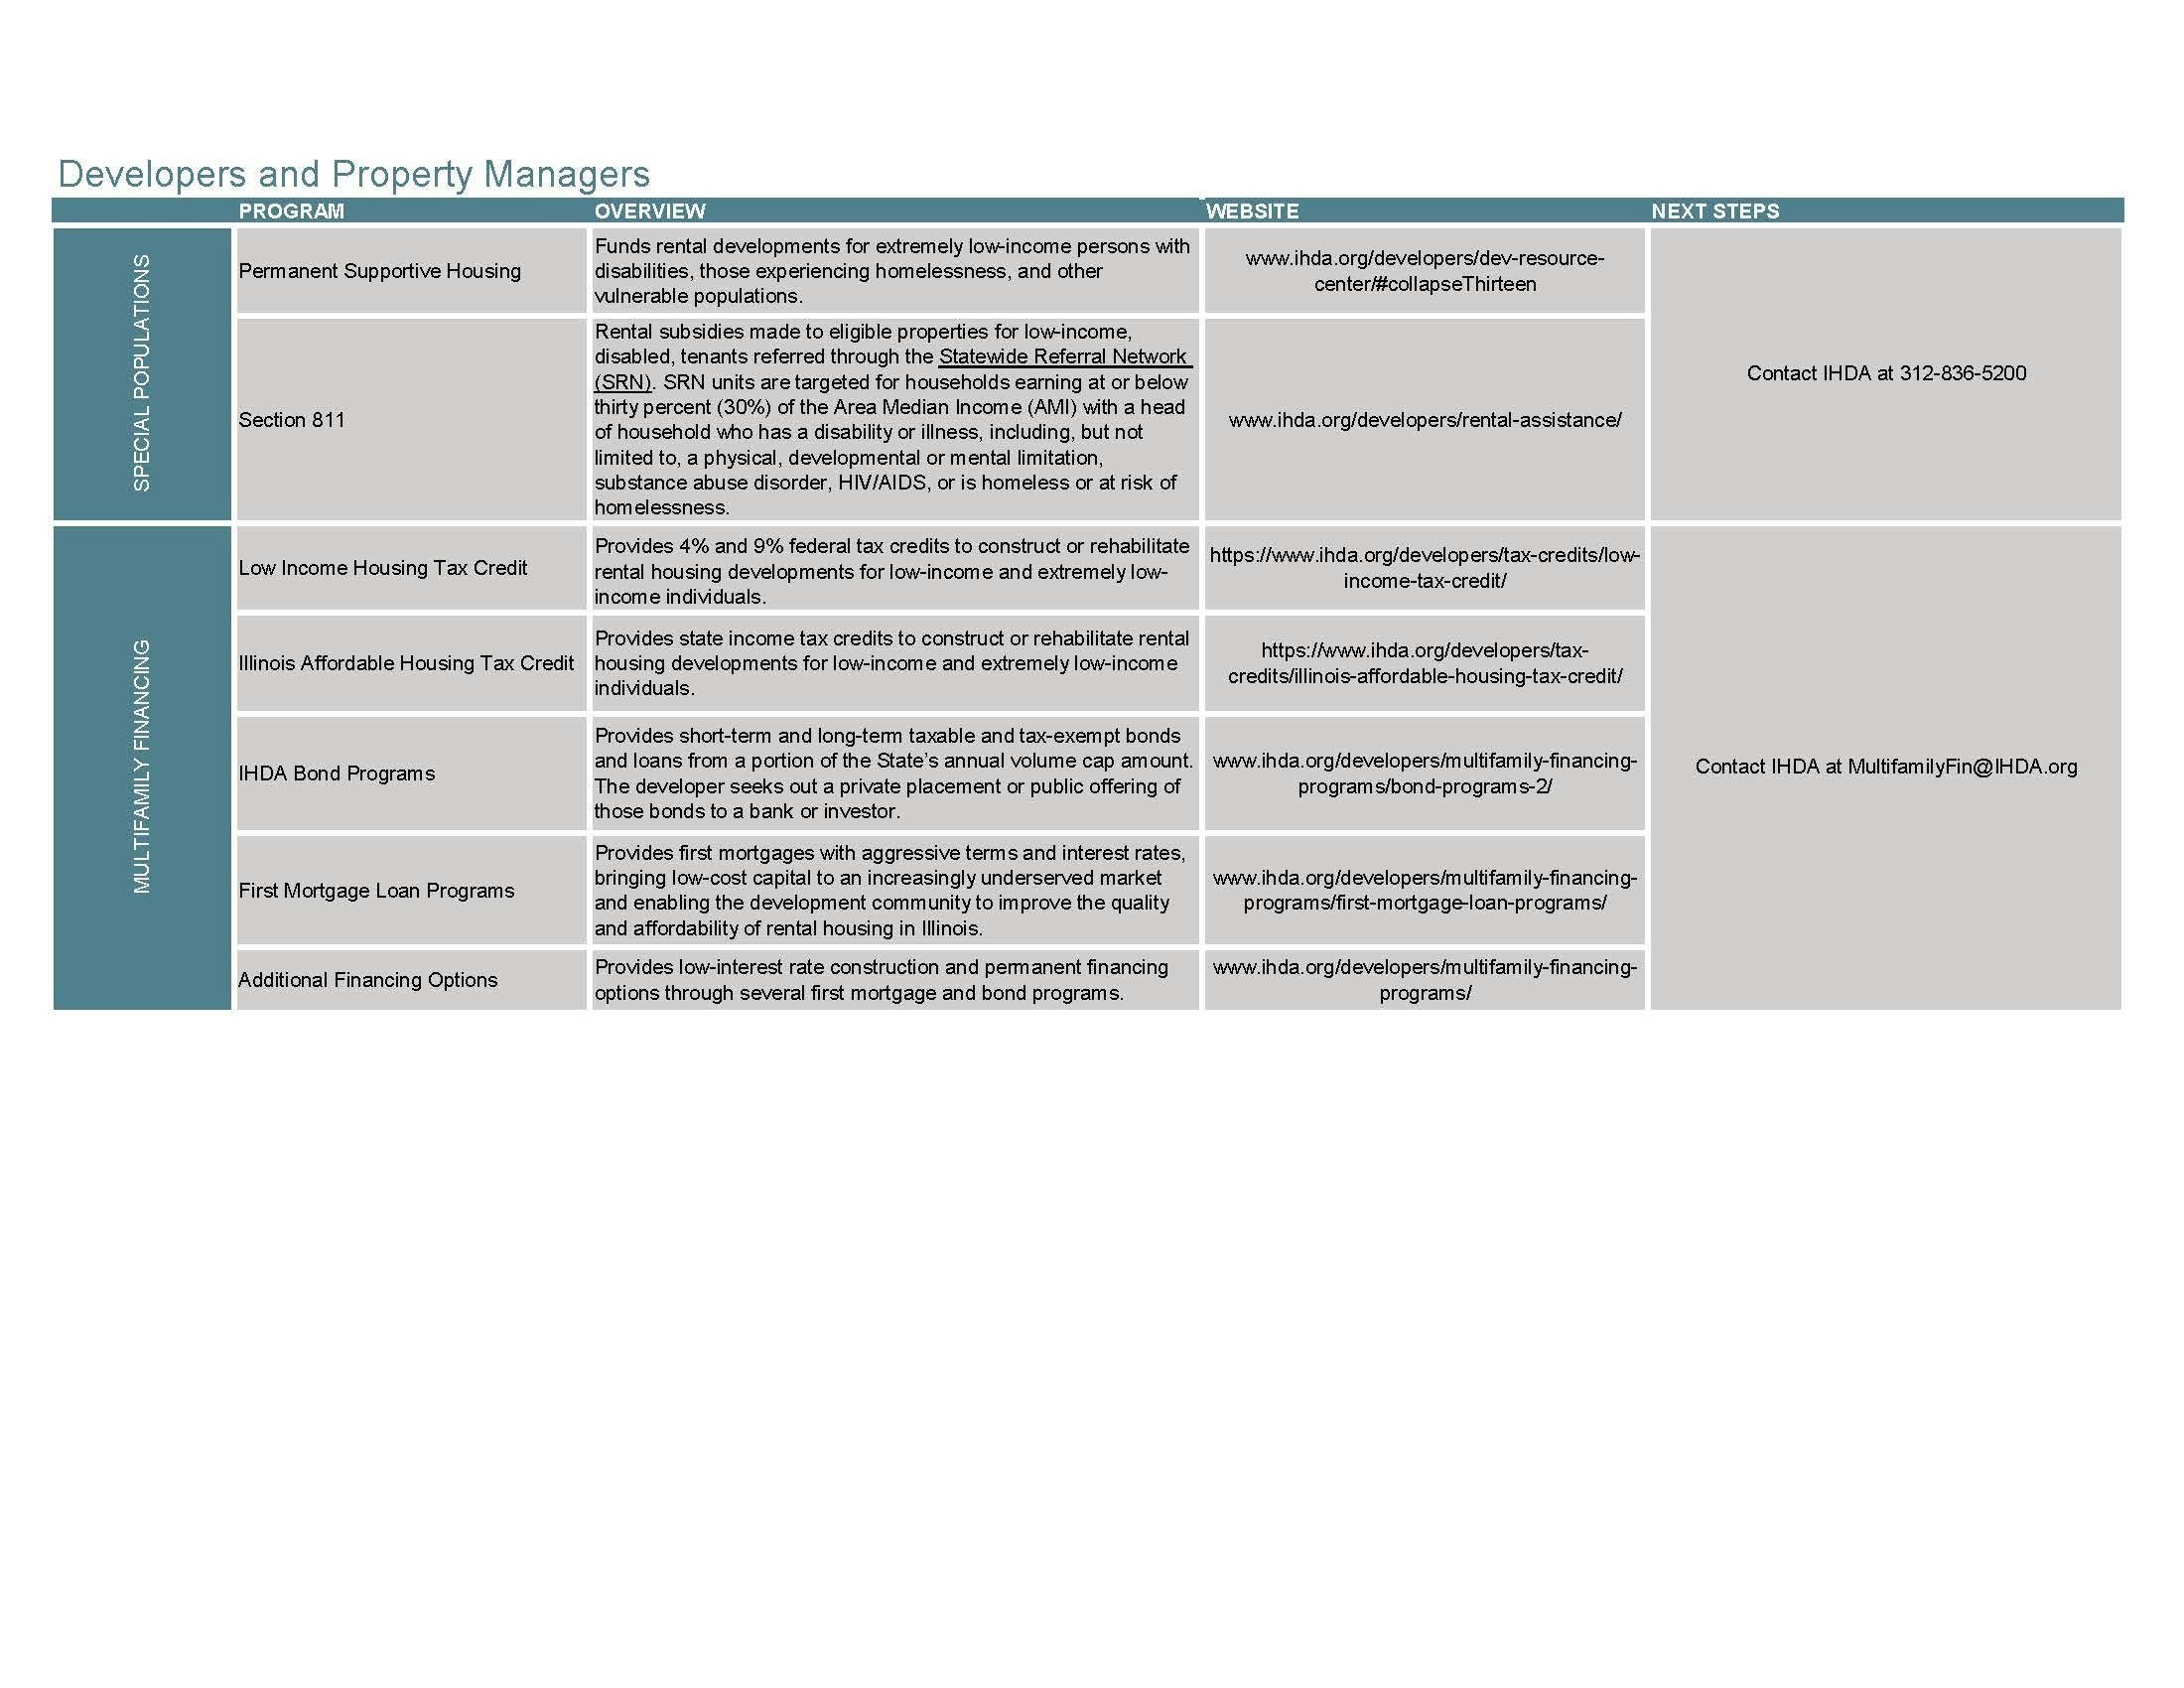 IHDA Programs and Resources Guide_Page_3.jpg